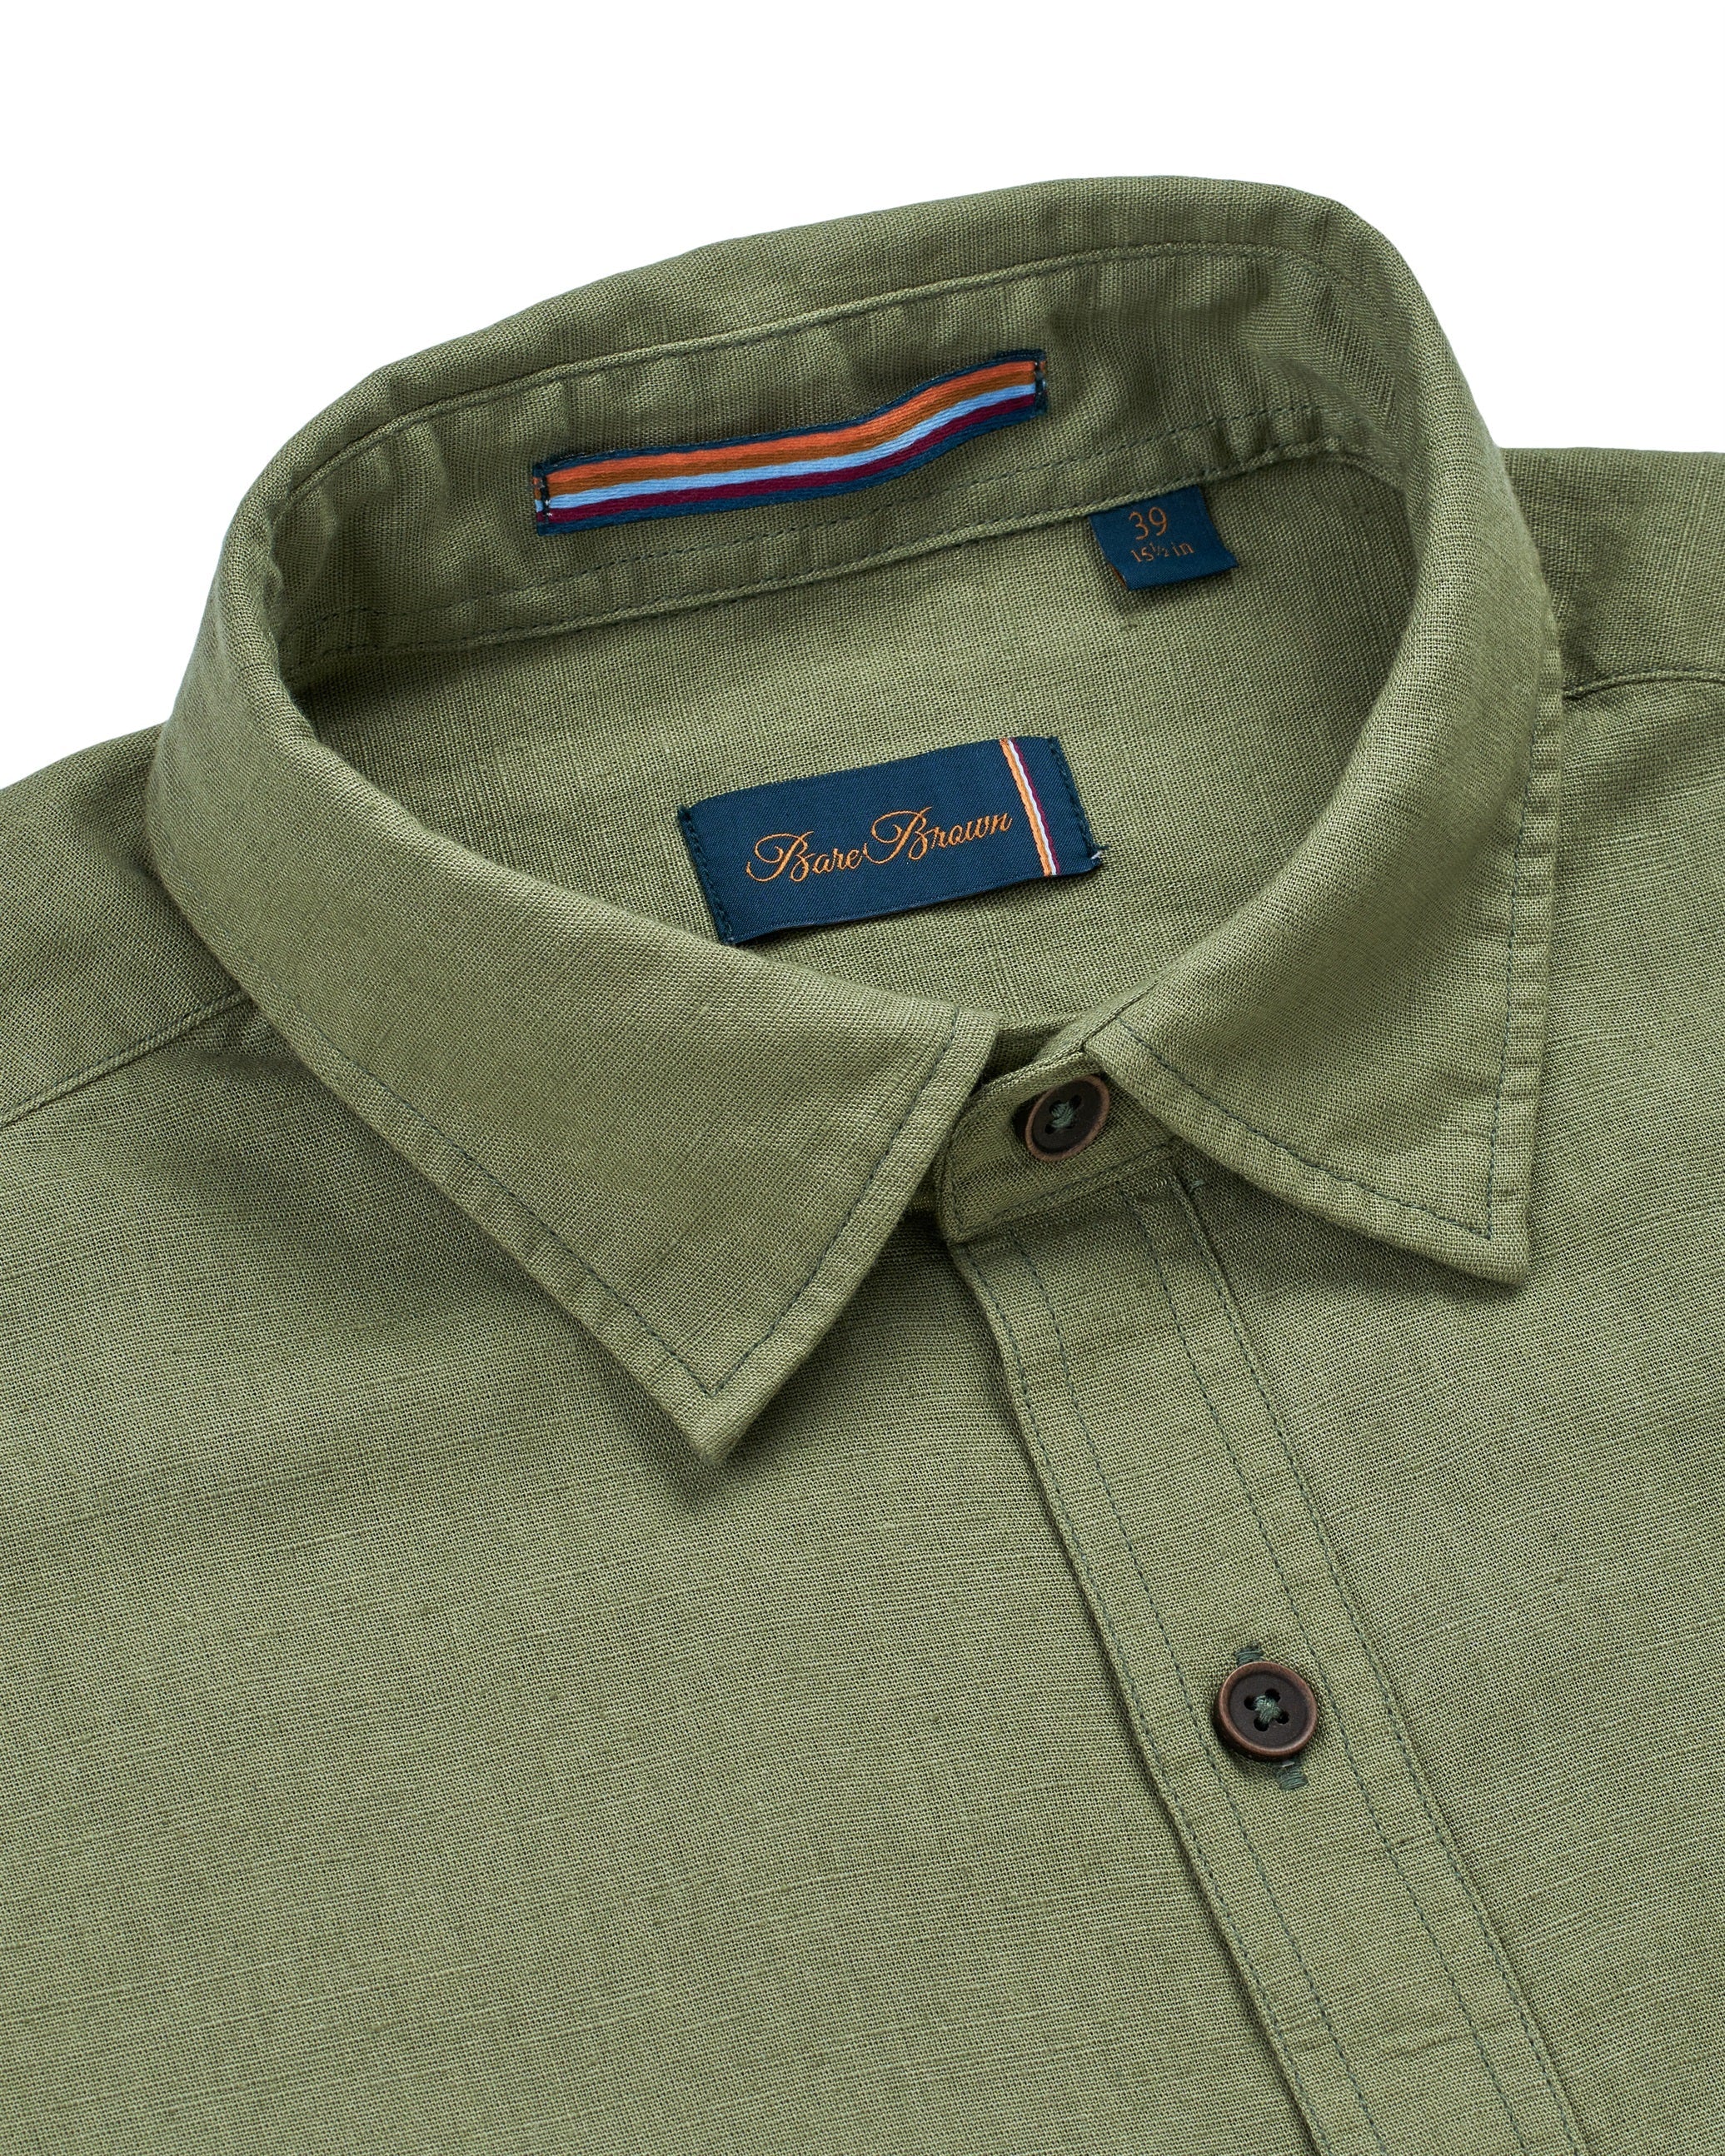 Bare Brown Regular Collar Cotton Linen Shirt, Slim Fit with Full Sleeves - Olive